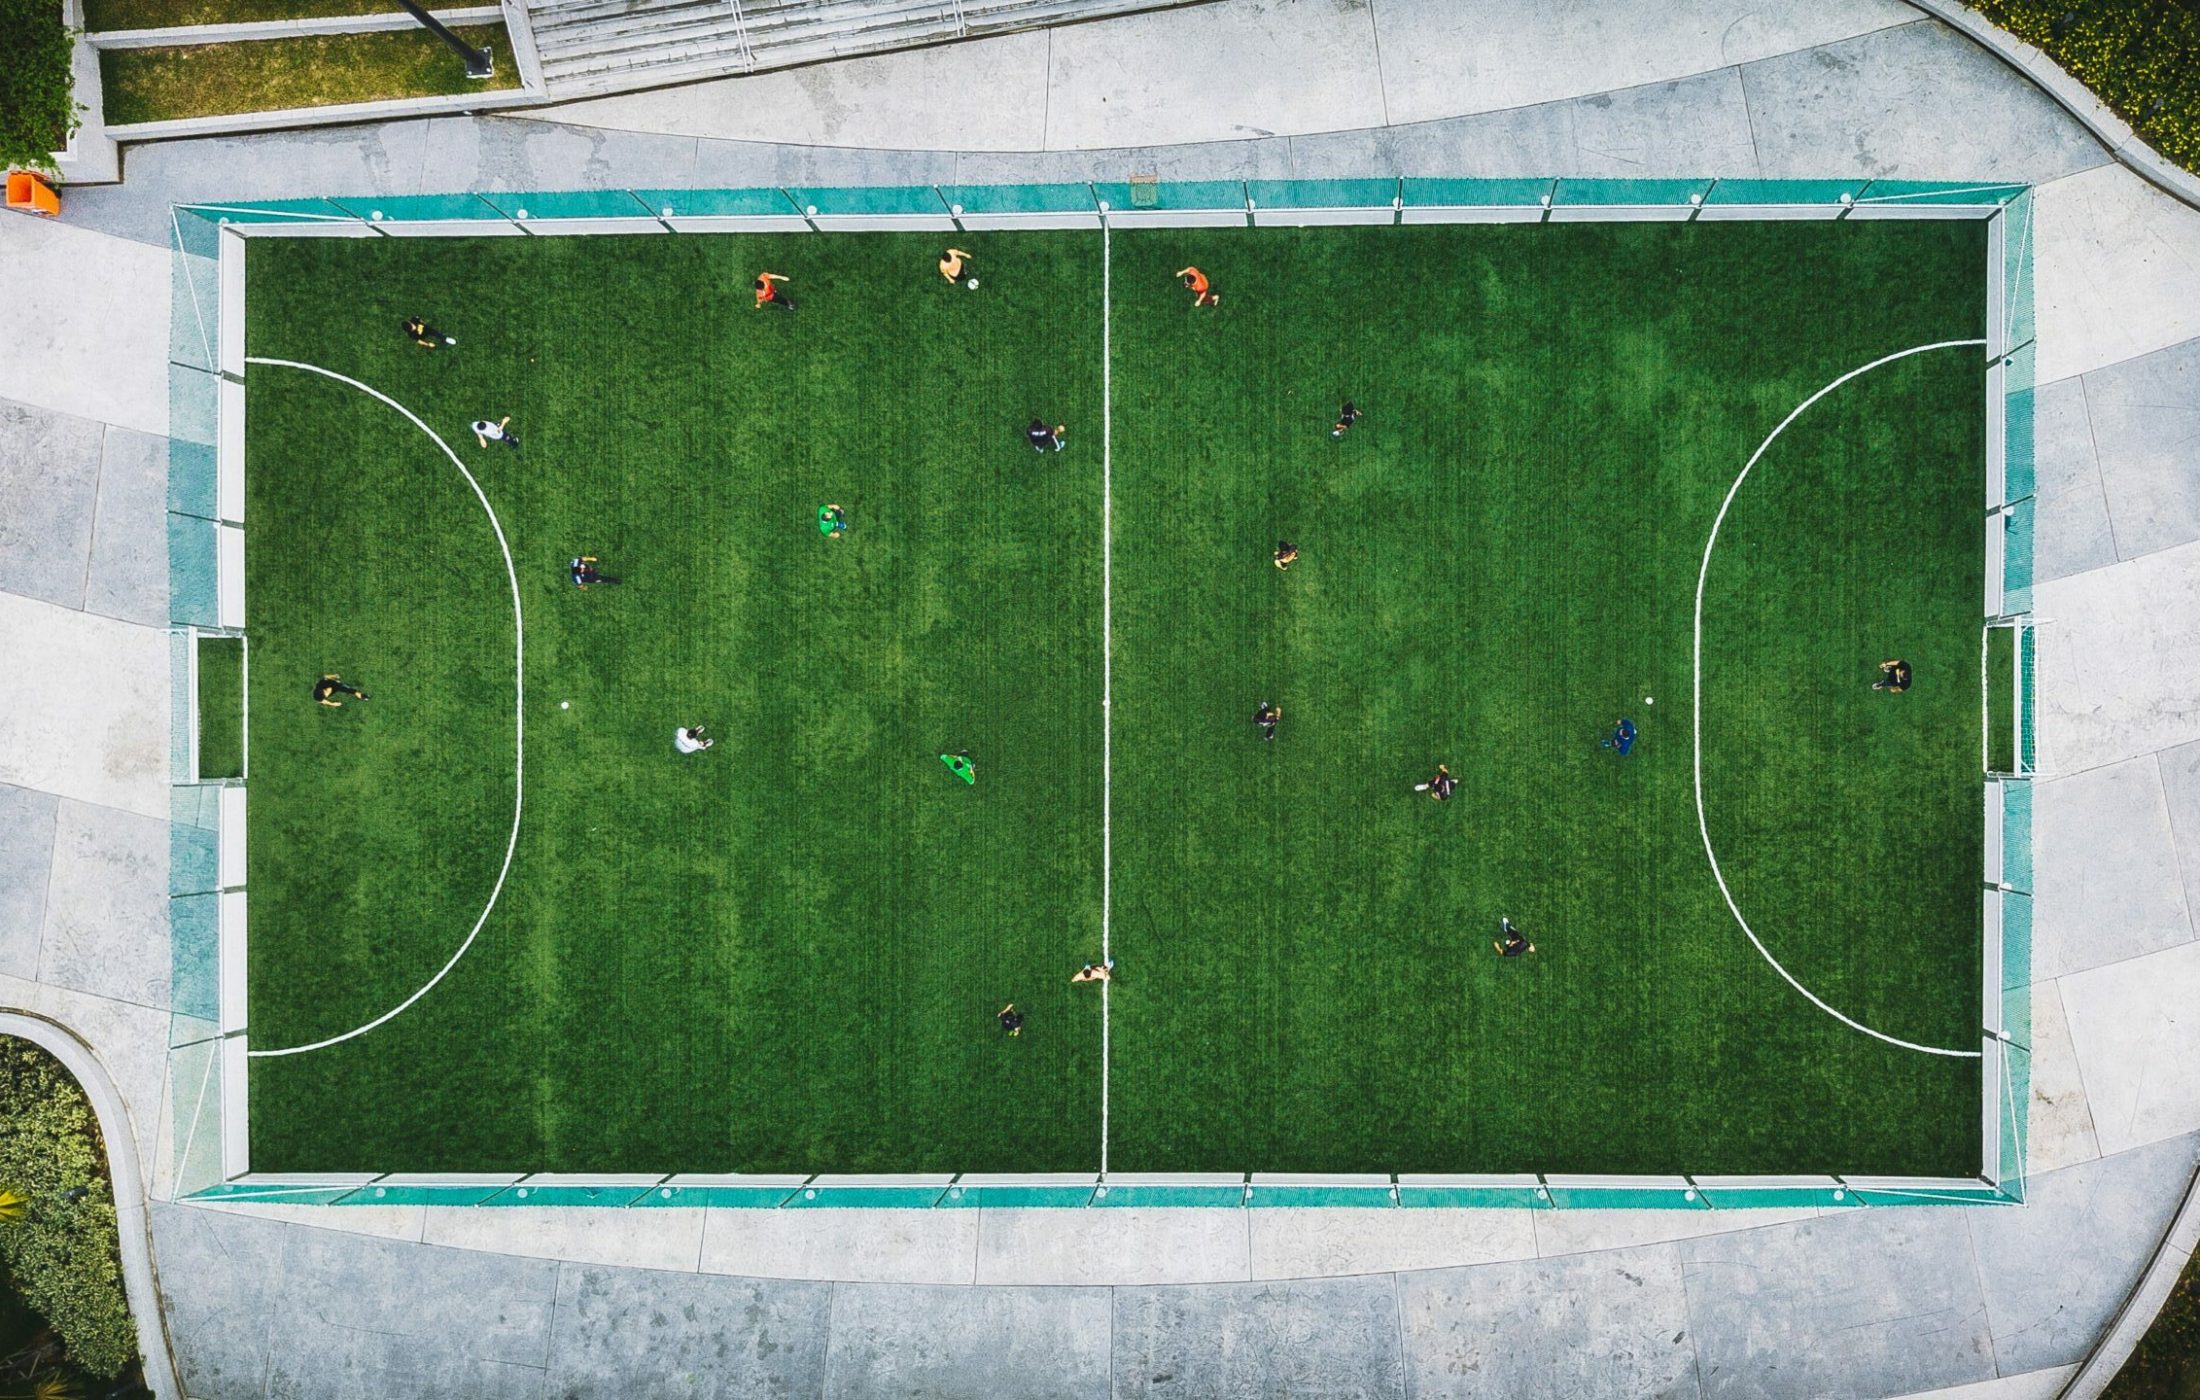 Green soccer field from above